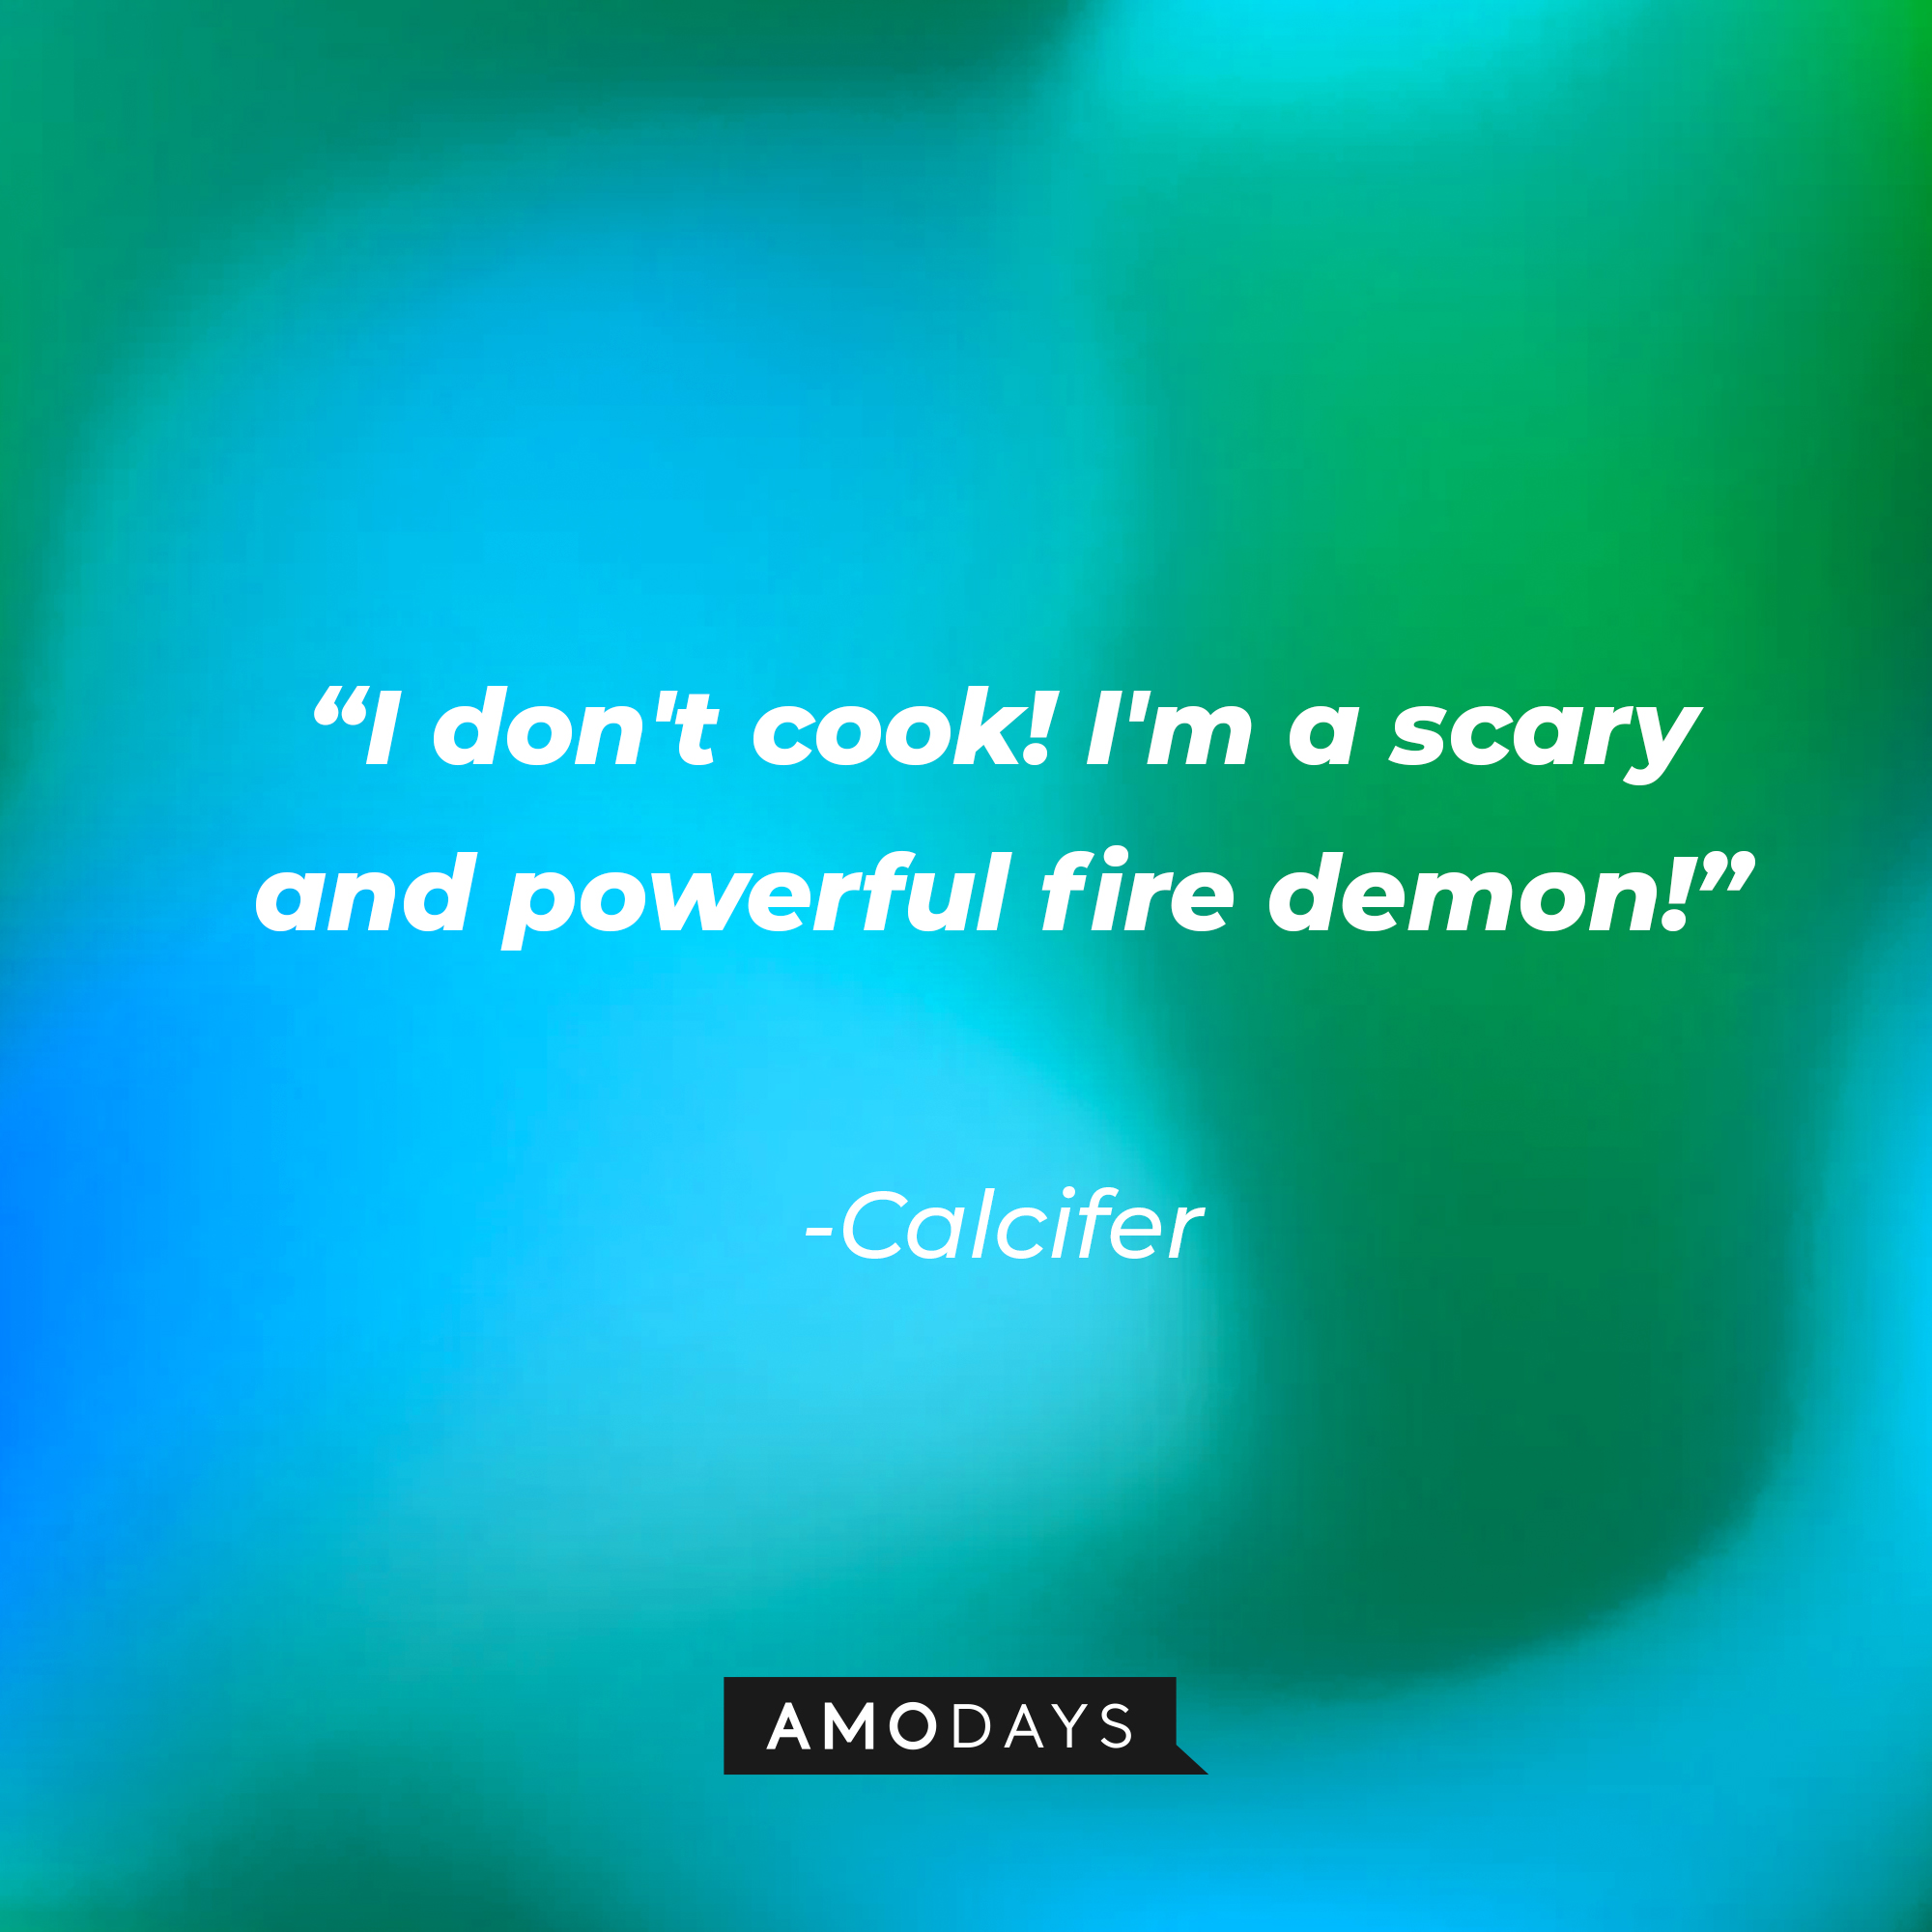 Calcifer’s quote: “I don't cook! I'm a scary and powerful fire demon!” | Source: AmoDays